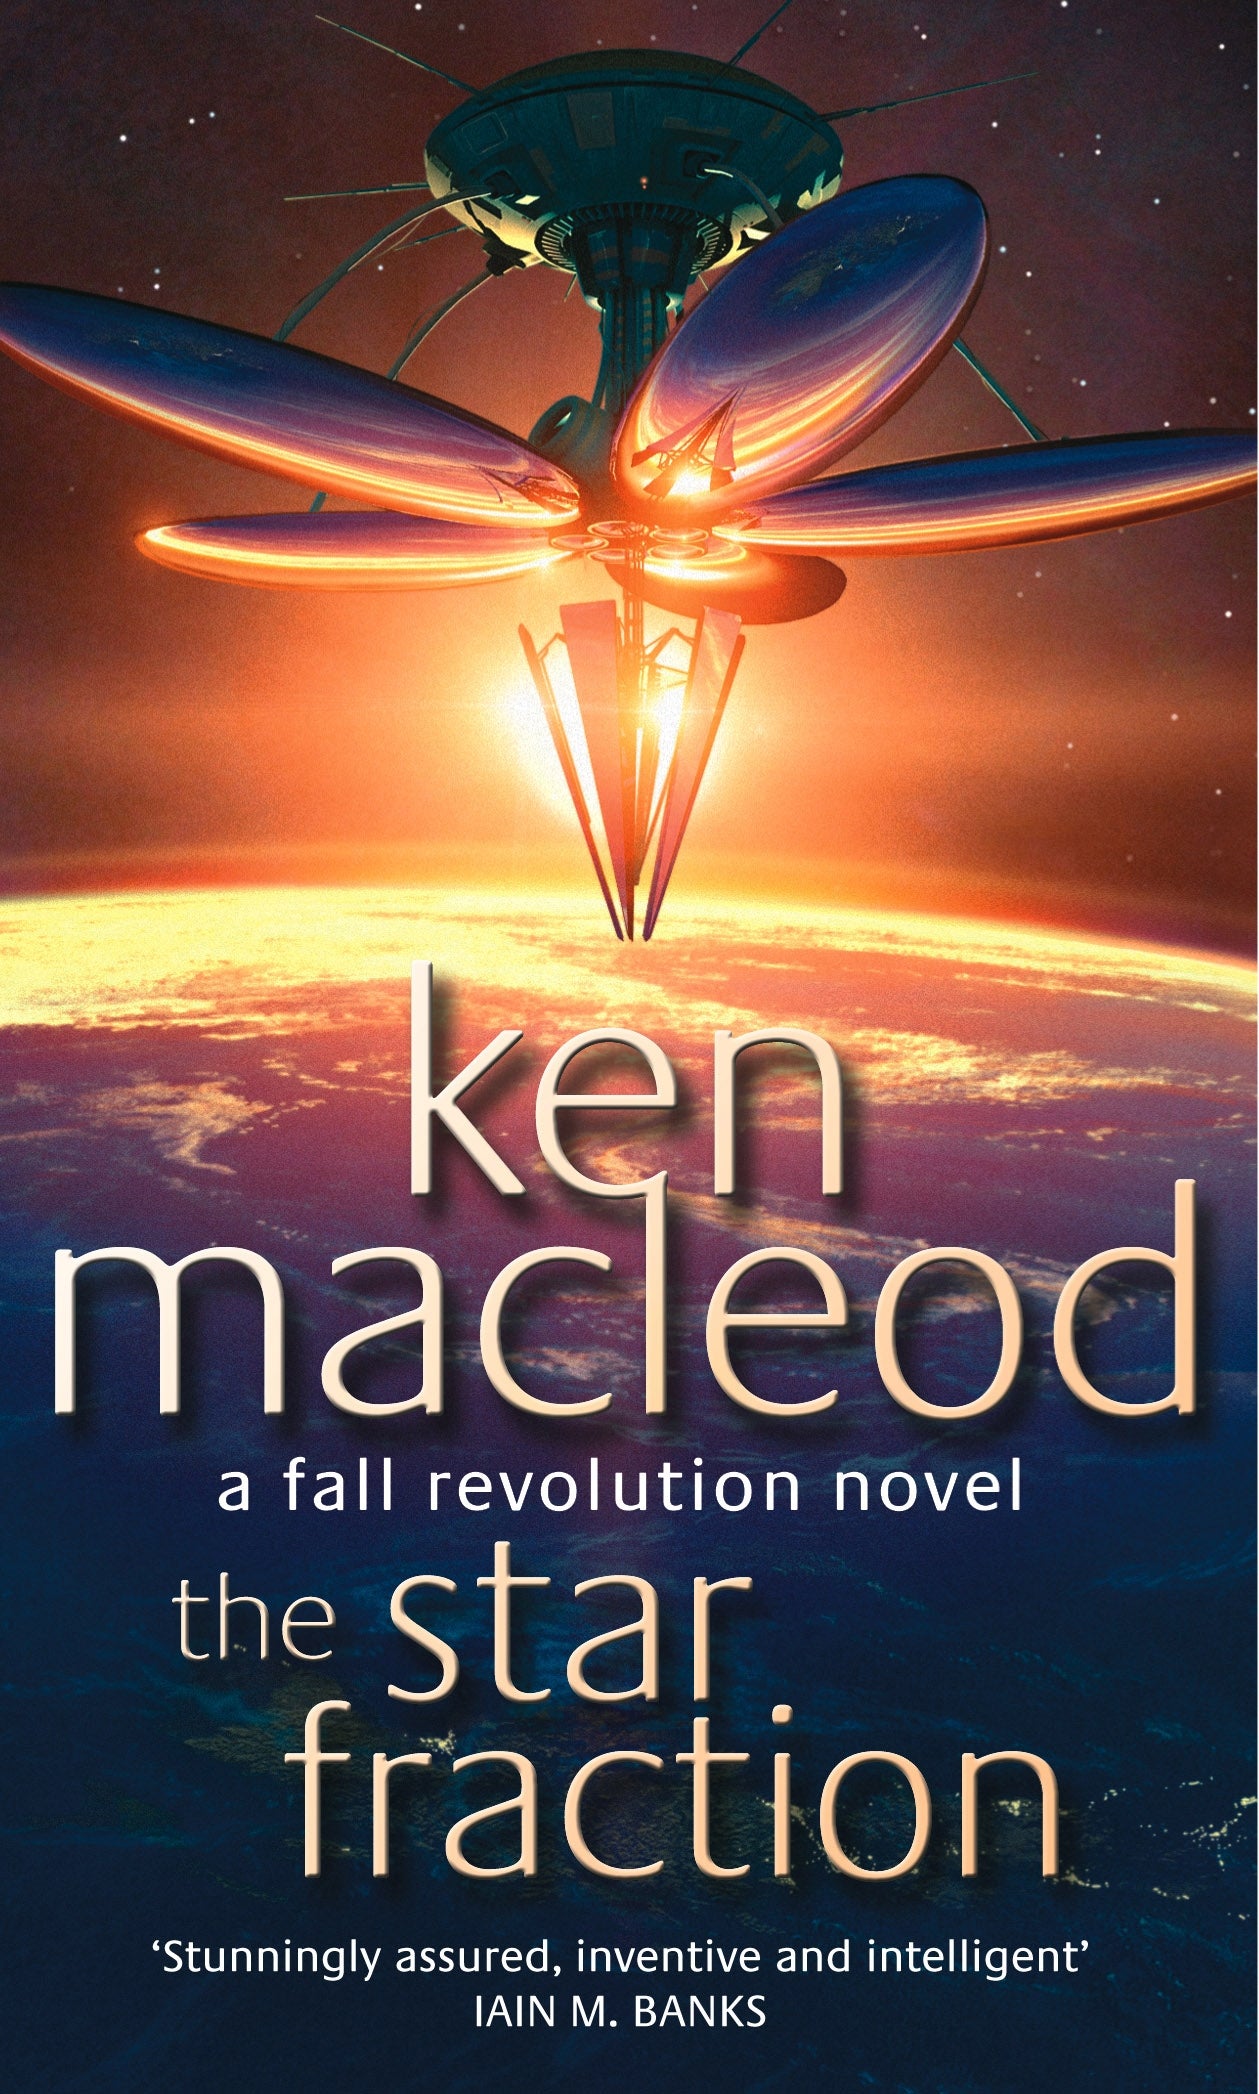 The Star Fraction by Ken MacLeod